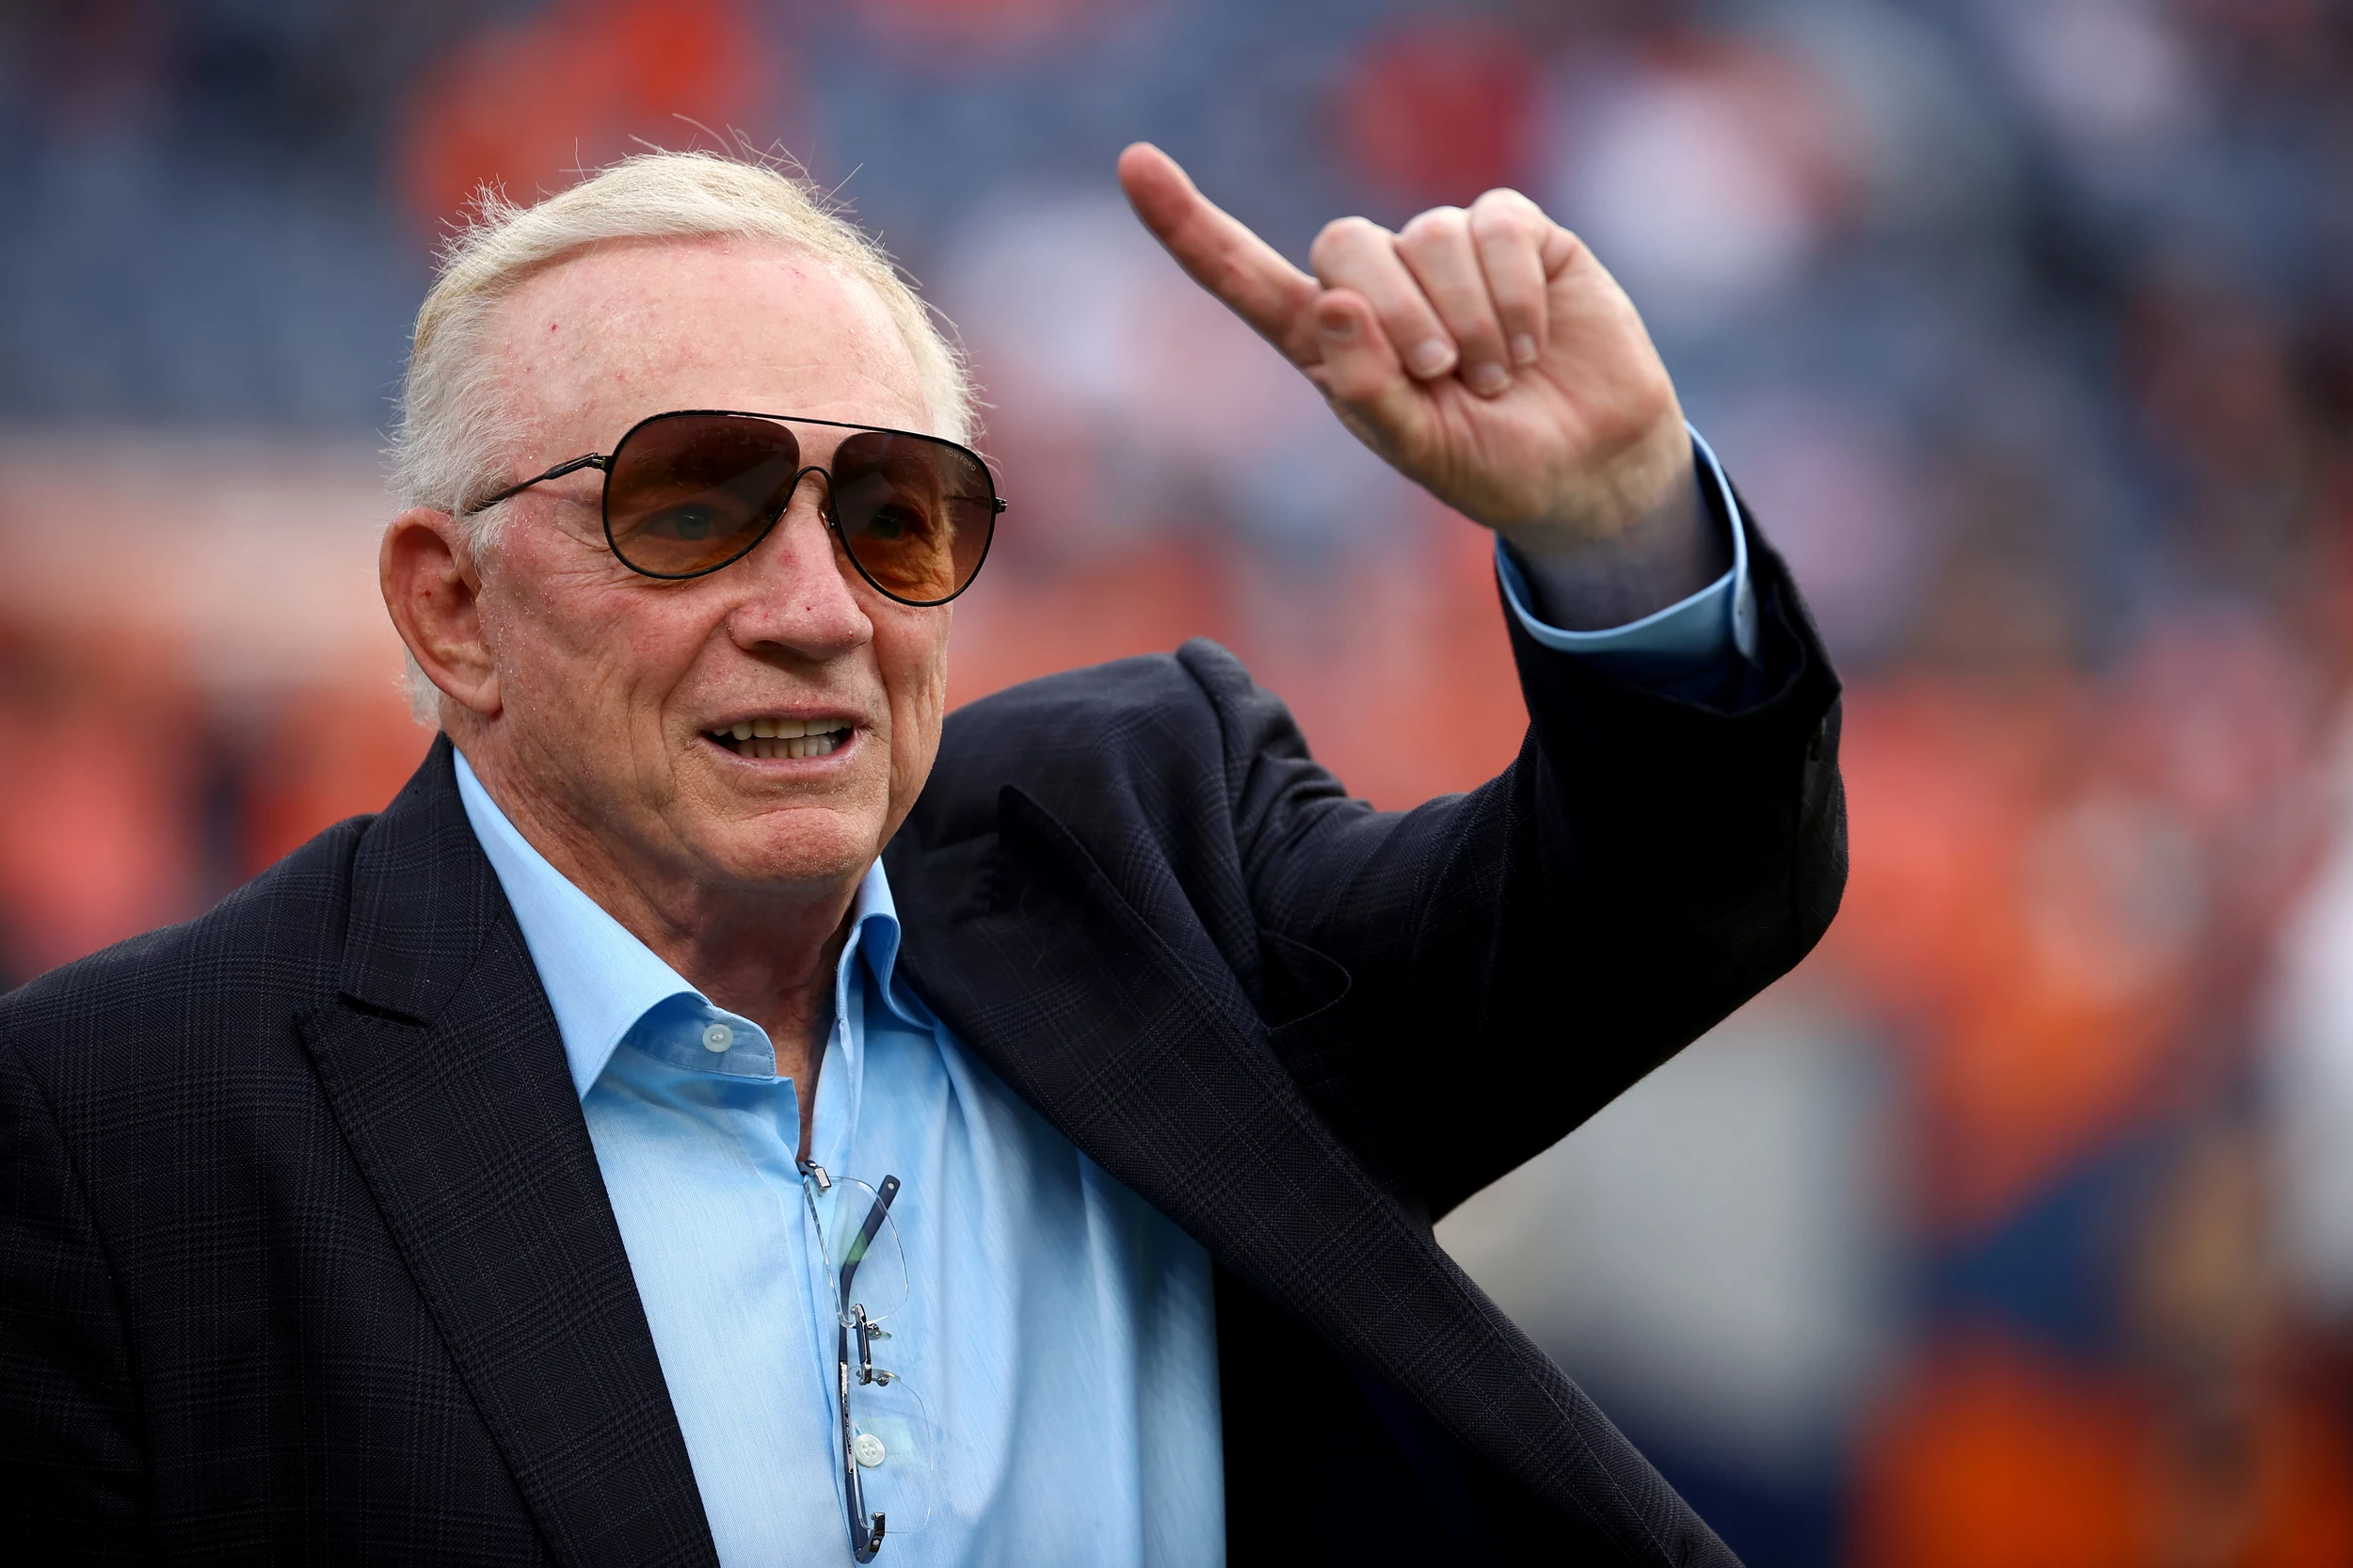 Jerry Jones Coughs on Radio, Then Asks for Shot of Jack [AUDIO]